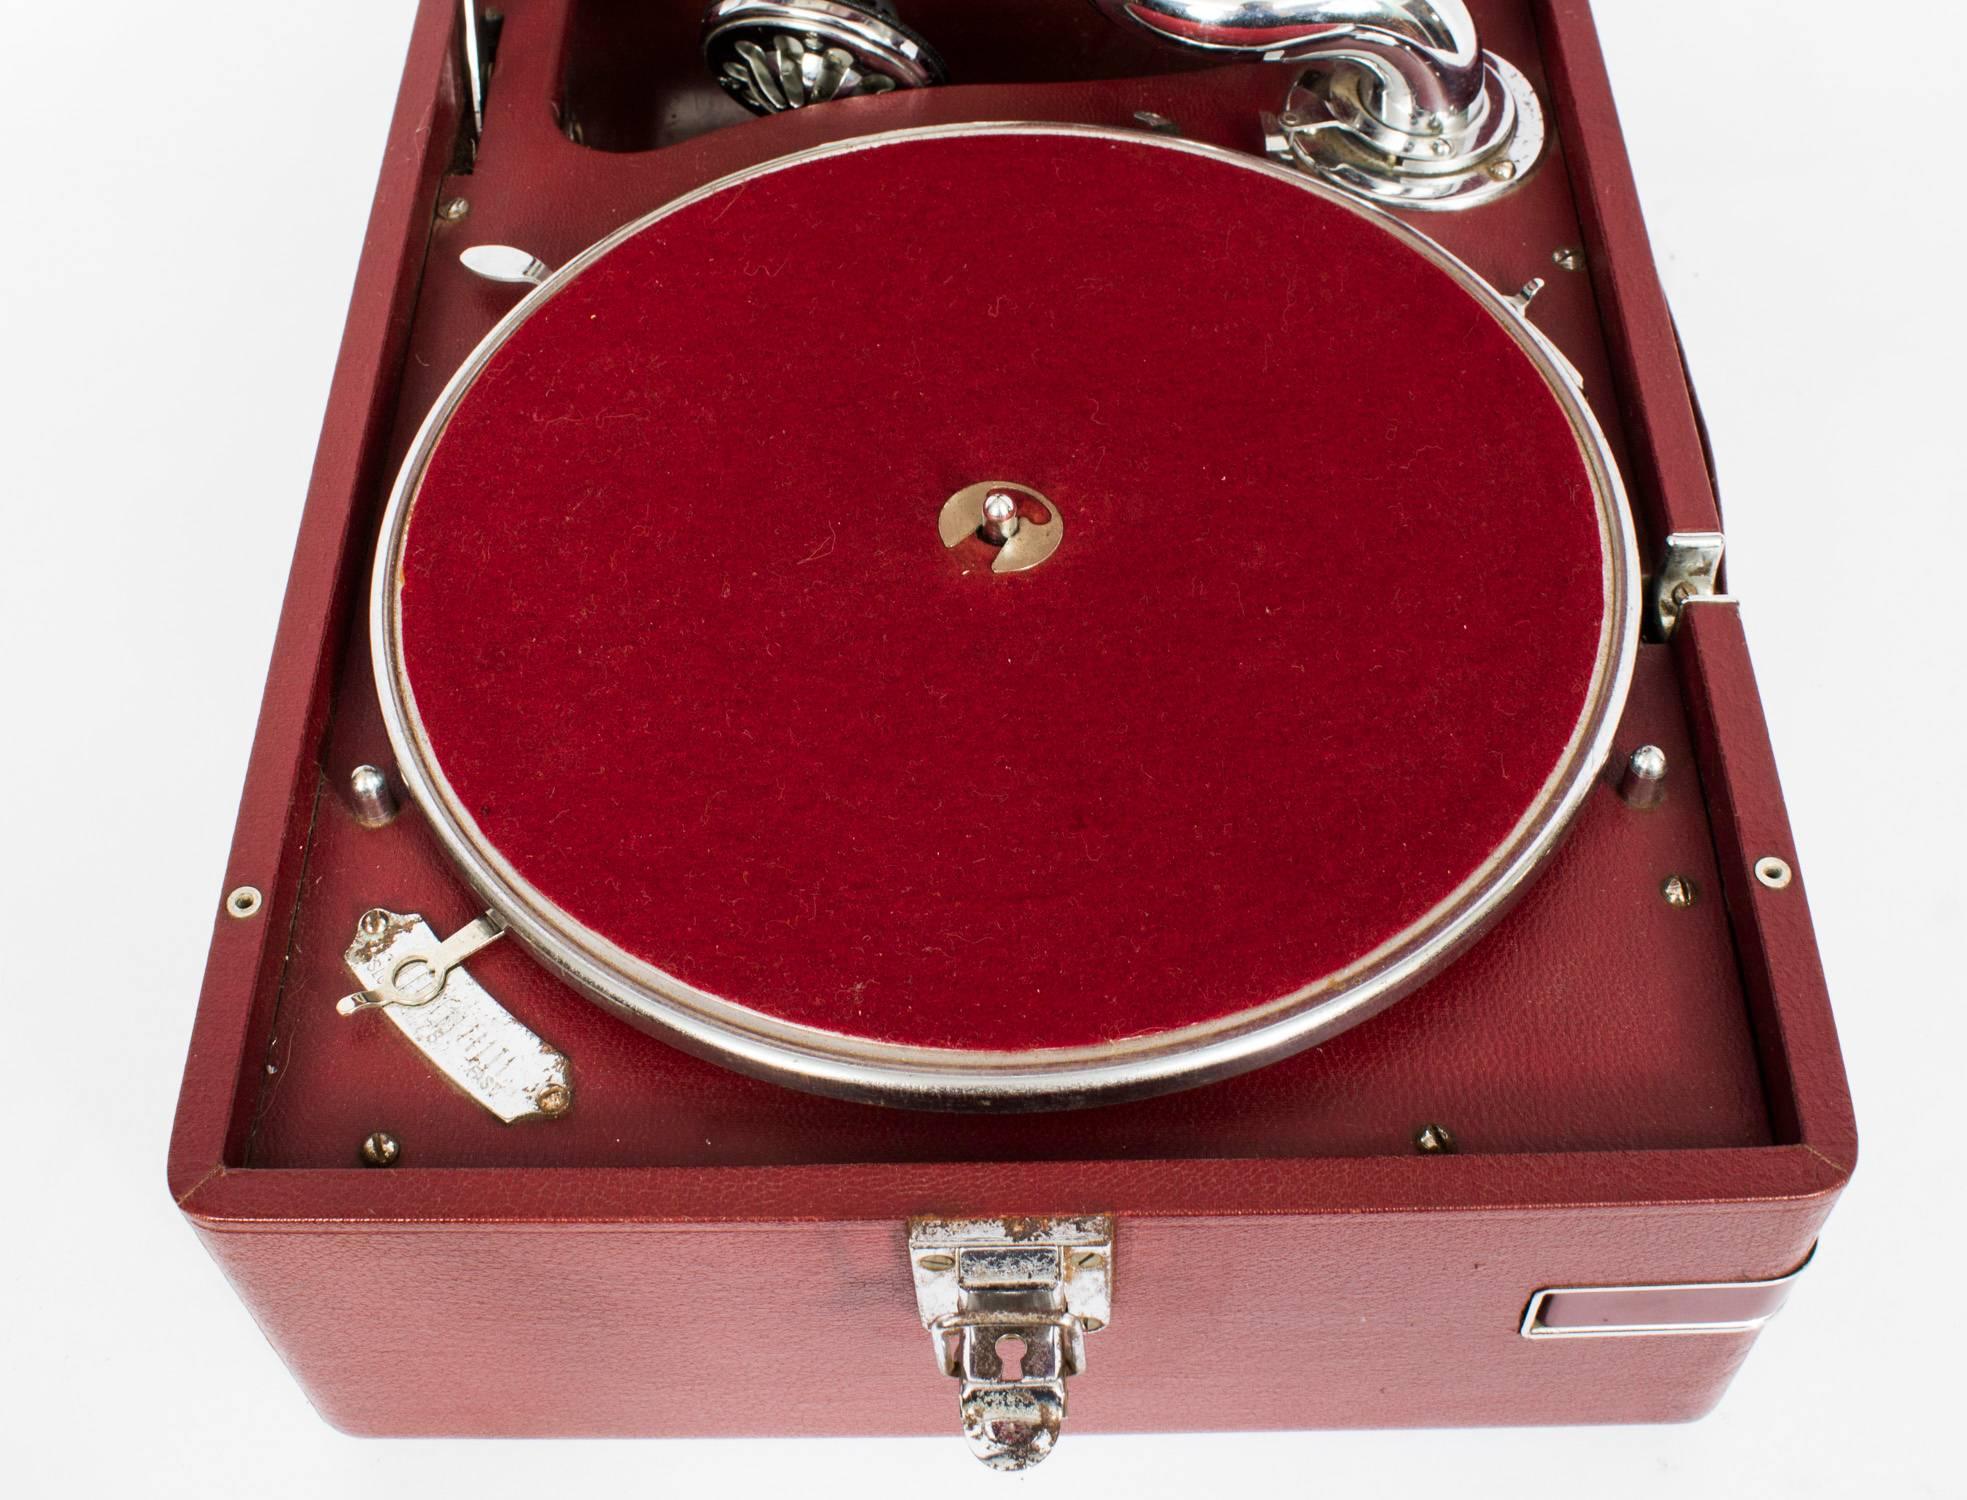 This really excellent portable gramophone was made by 'His Master's Voice' 

Model: 102 first made in 1931 and this one dates from 1935. 

Model No: 102 C

Serial no: 447398

This is a rare de-luxe variant in red leathercloth, a rare colour,